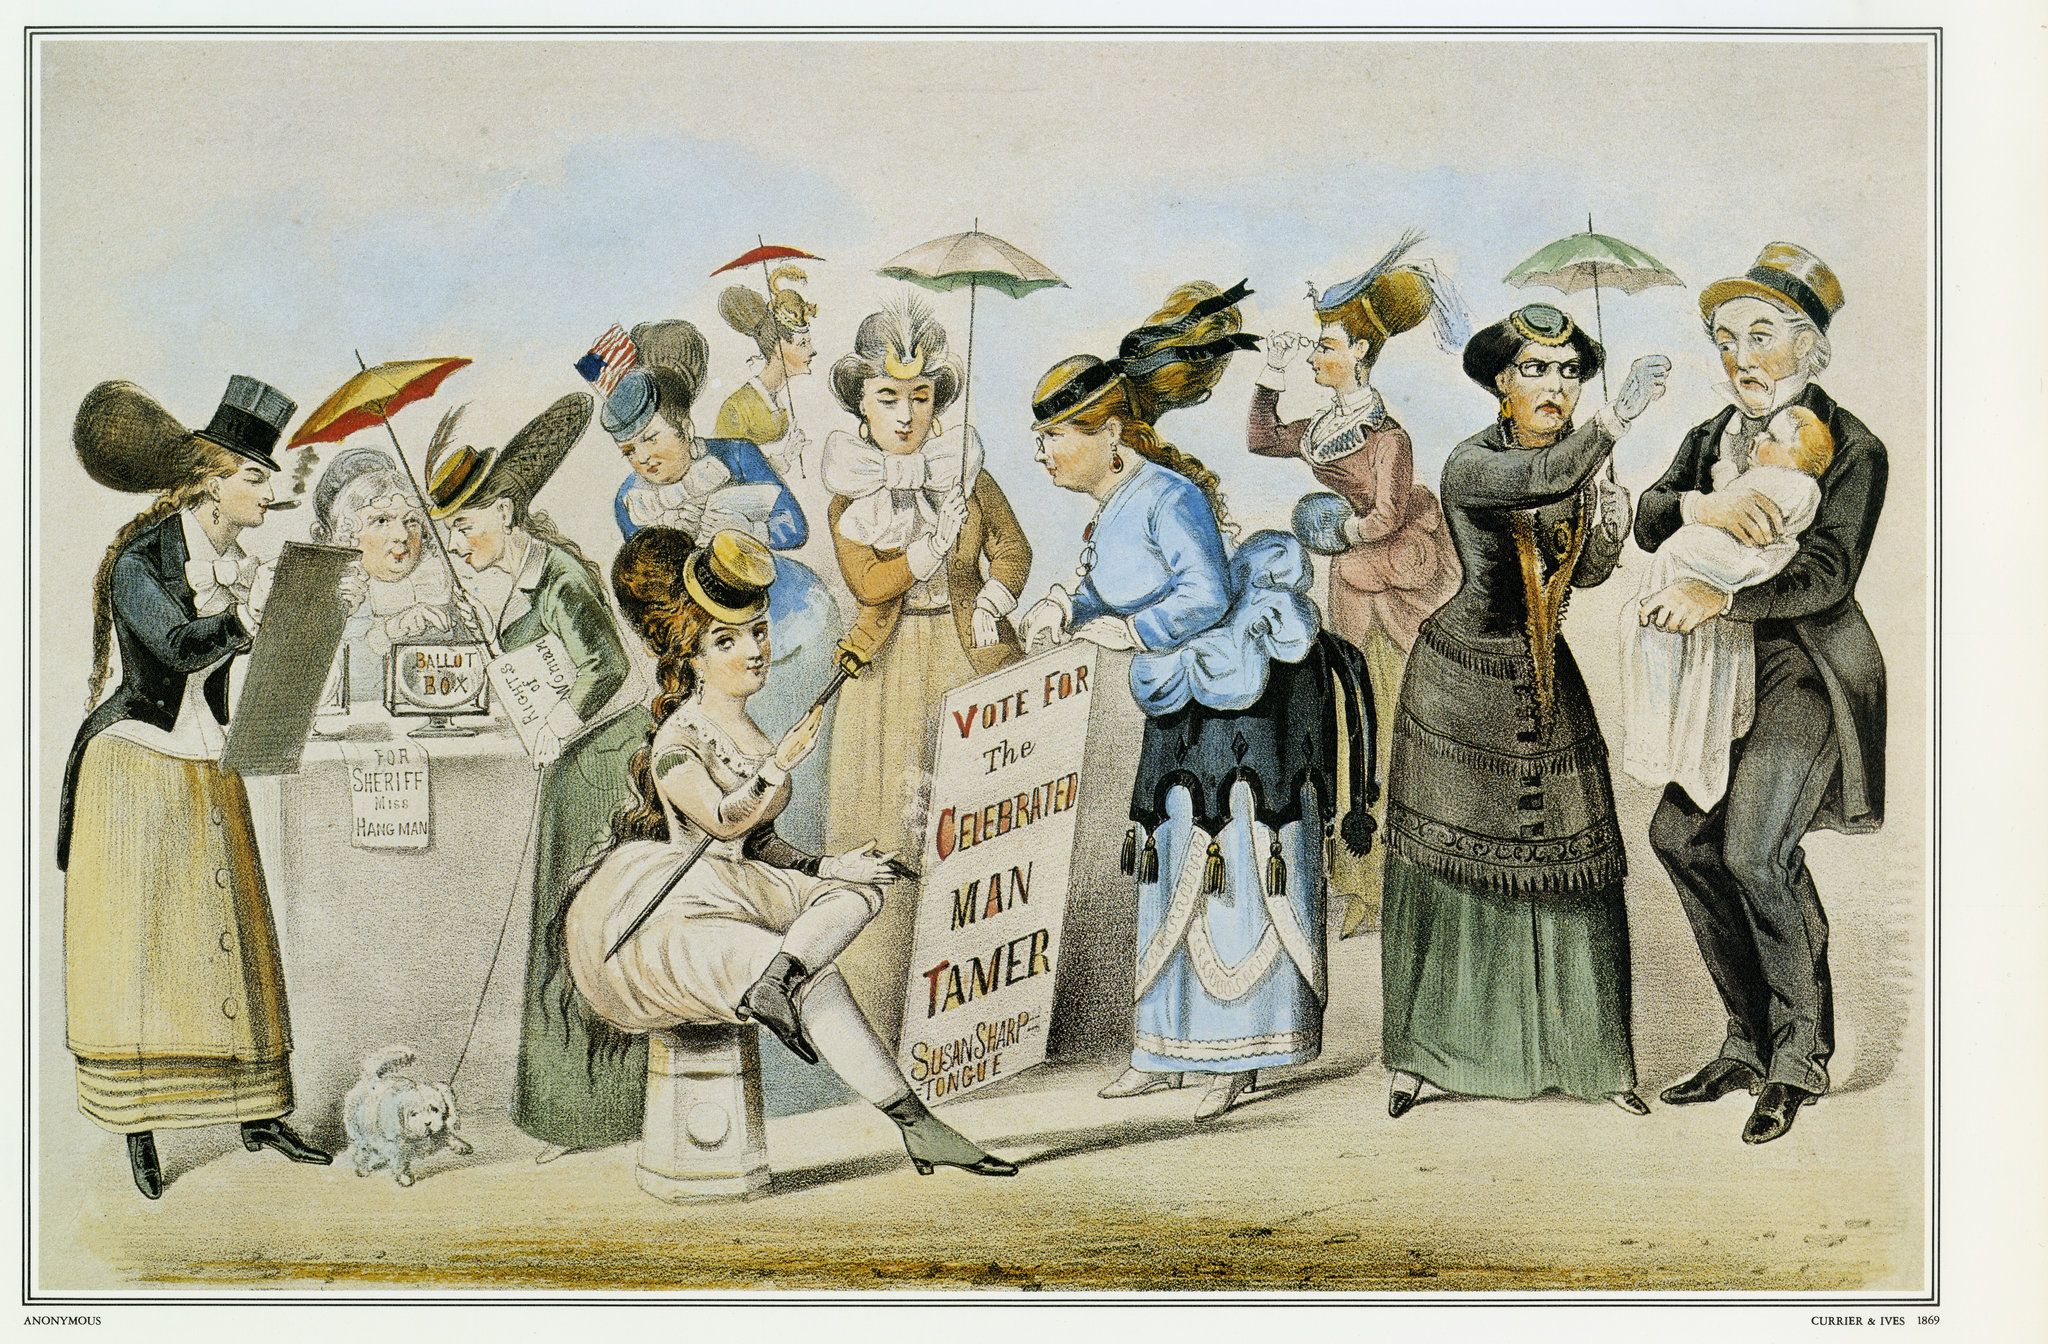 Empowered Women: Unveiling the Role and Influence of Women in 19th Century Britain